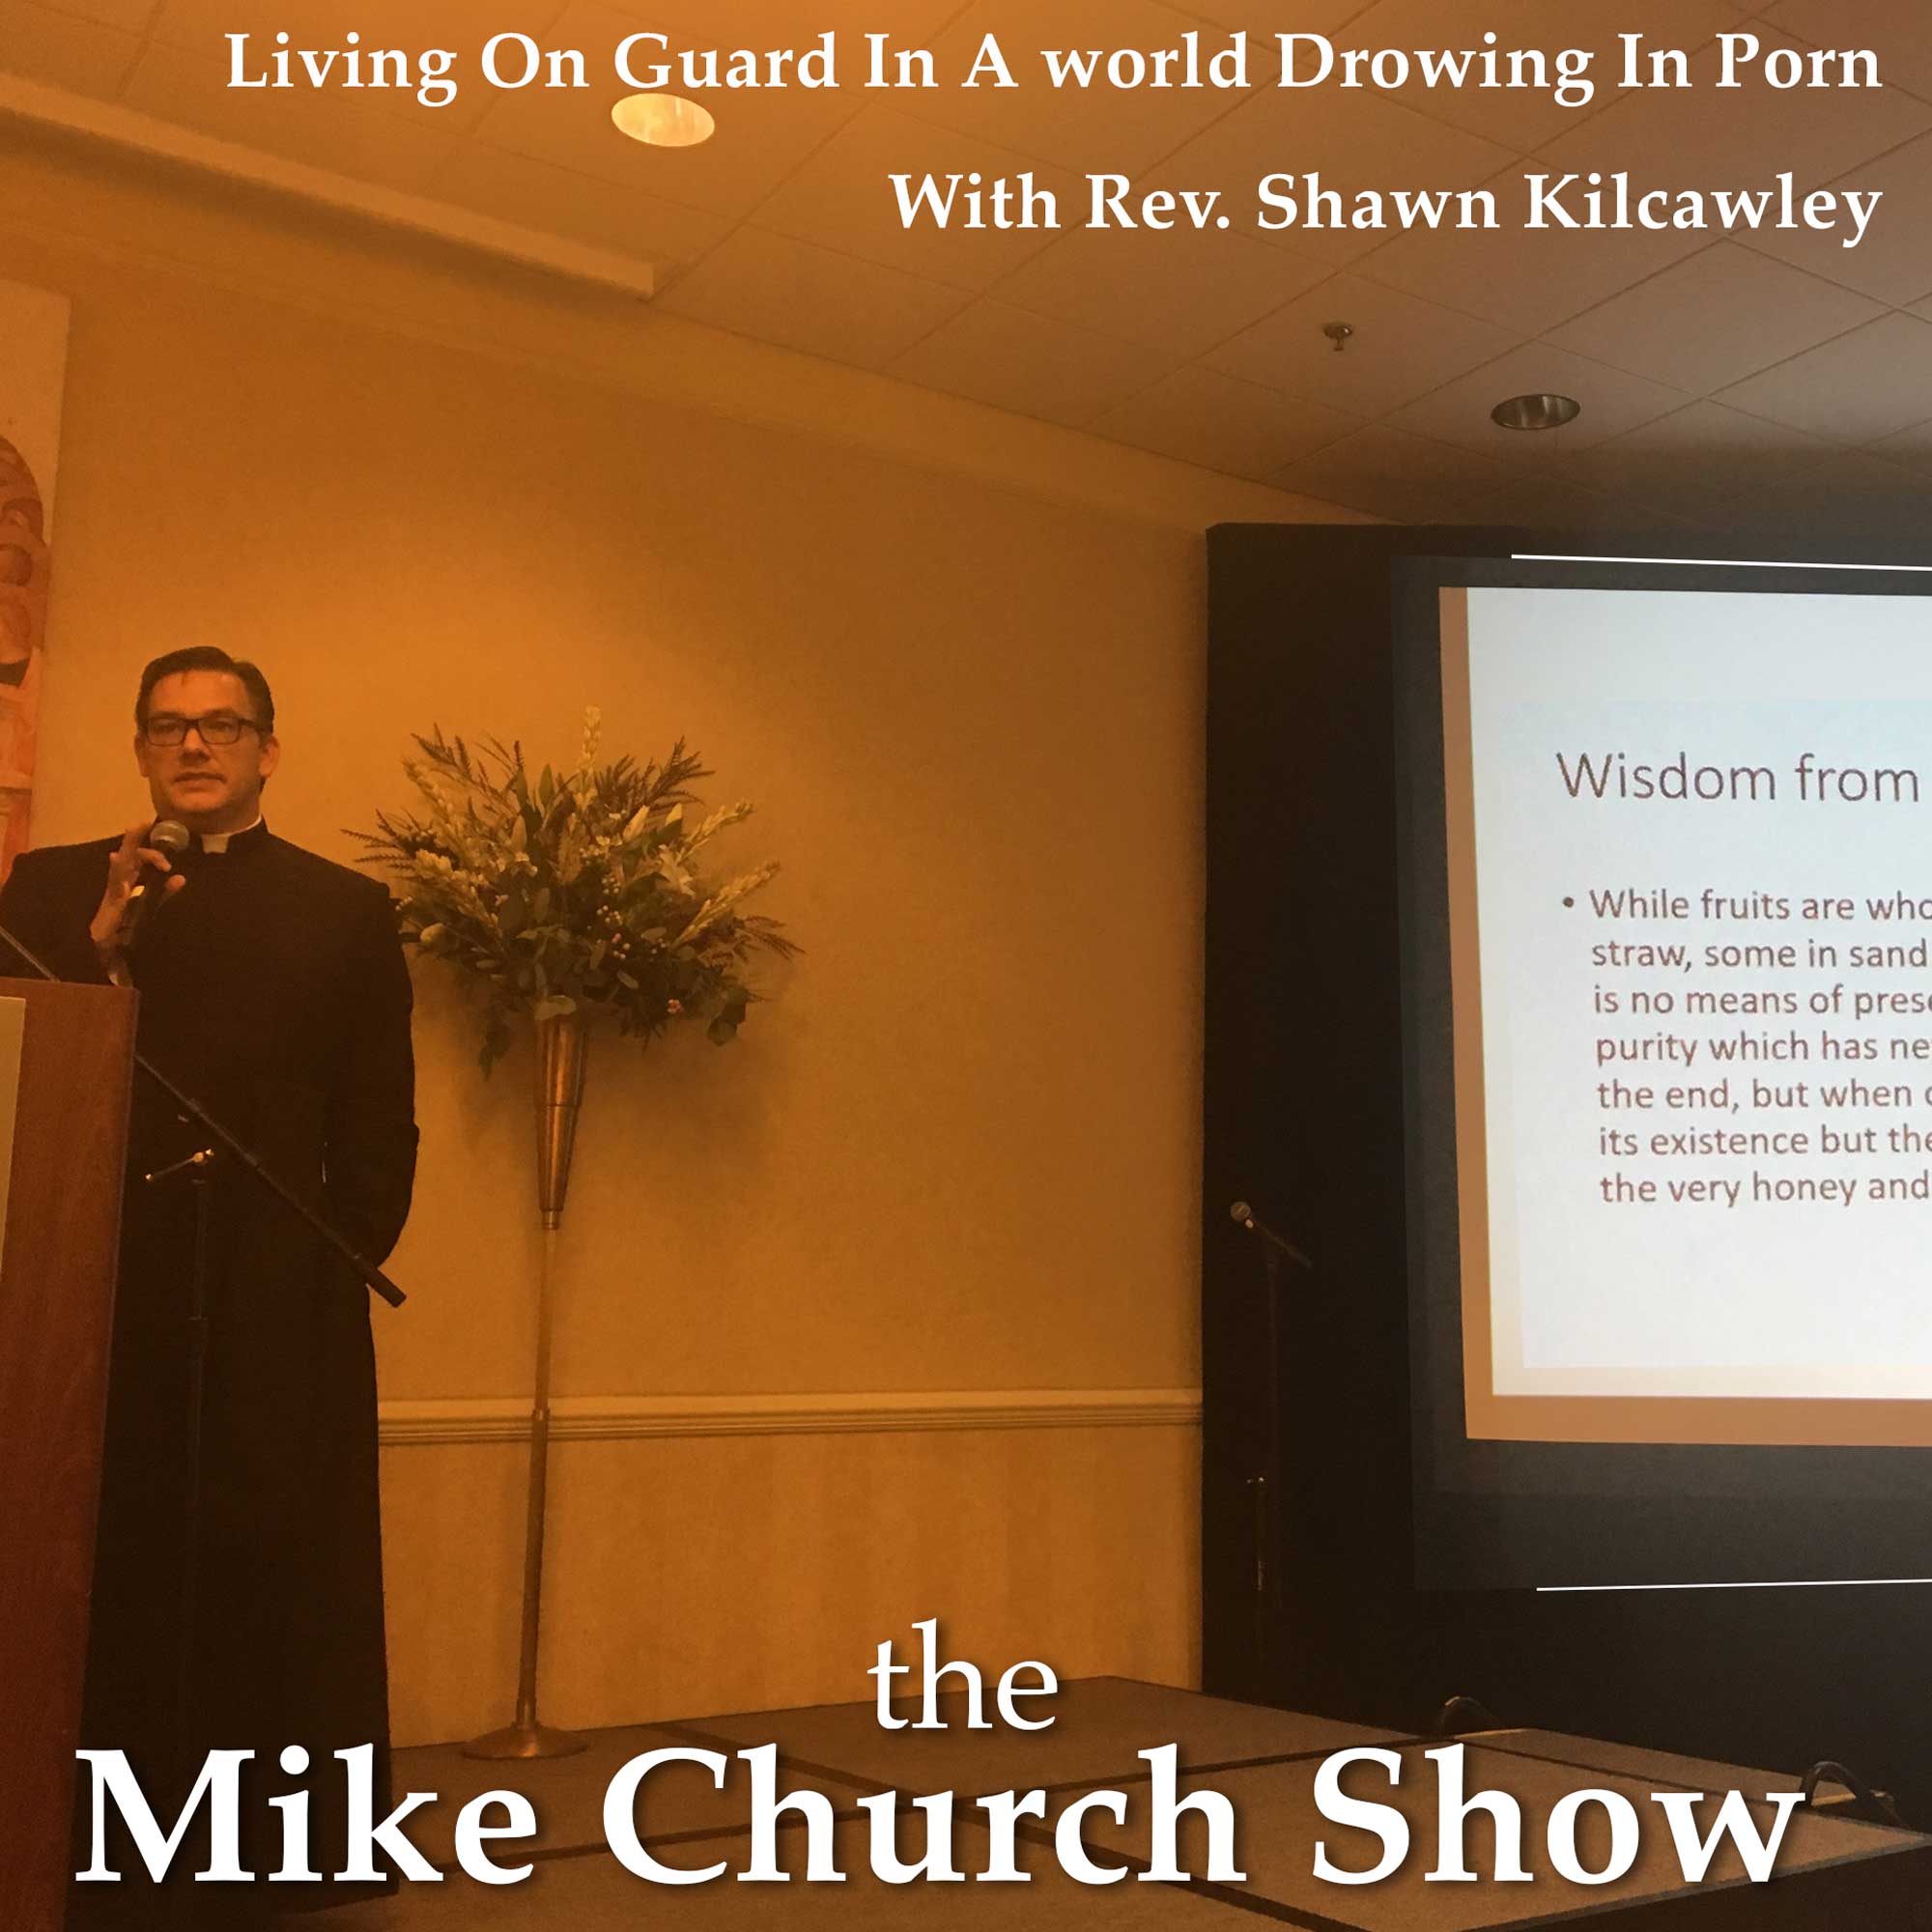 Public Church Porn - Living On Guard In A World Drowning In Porn-with Fr. Shawn ...